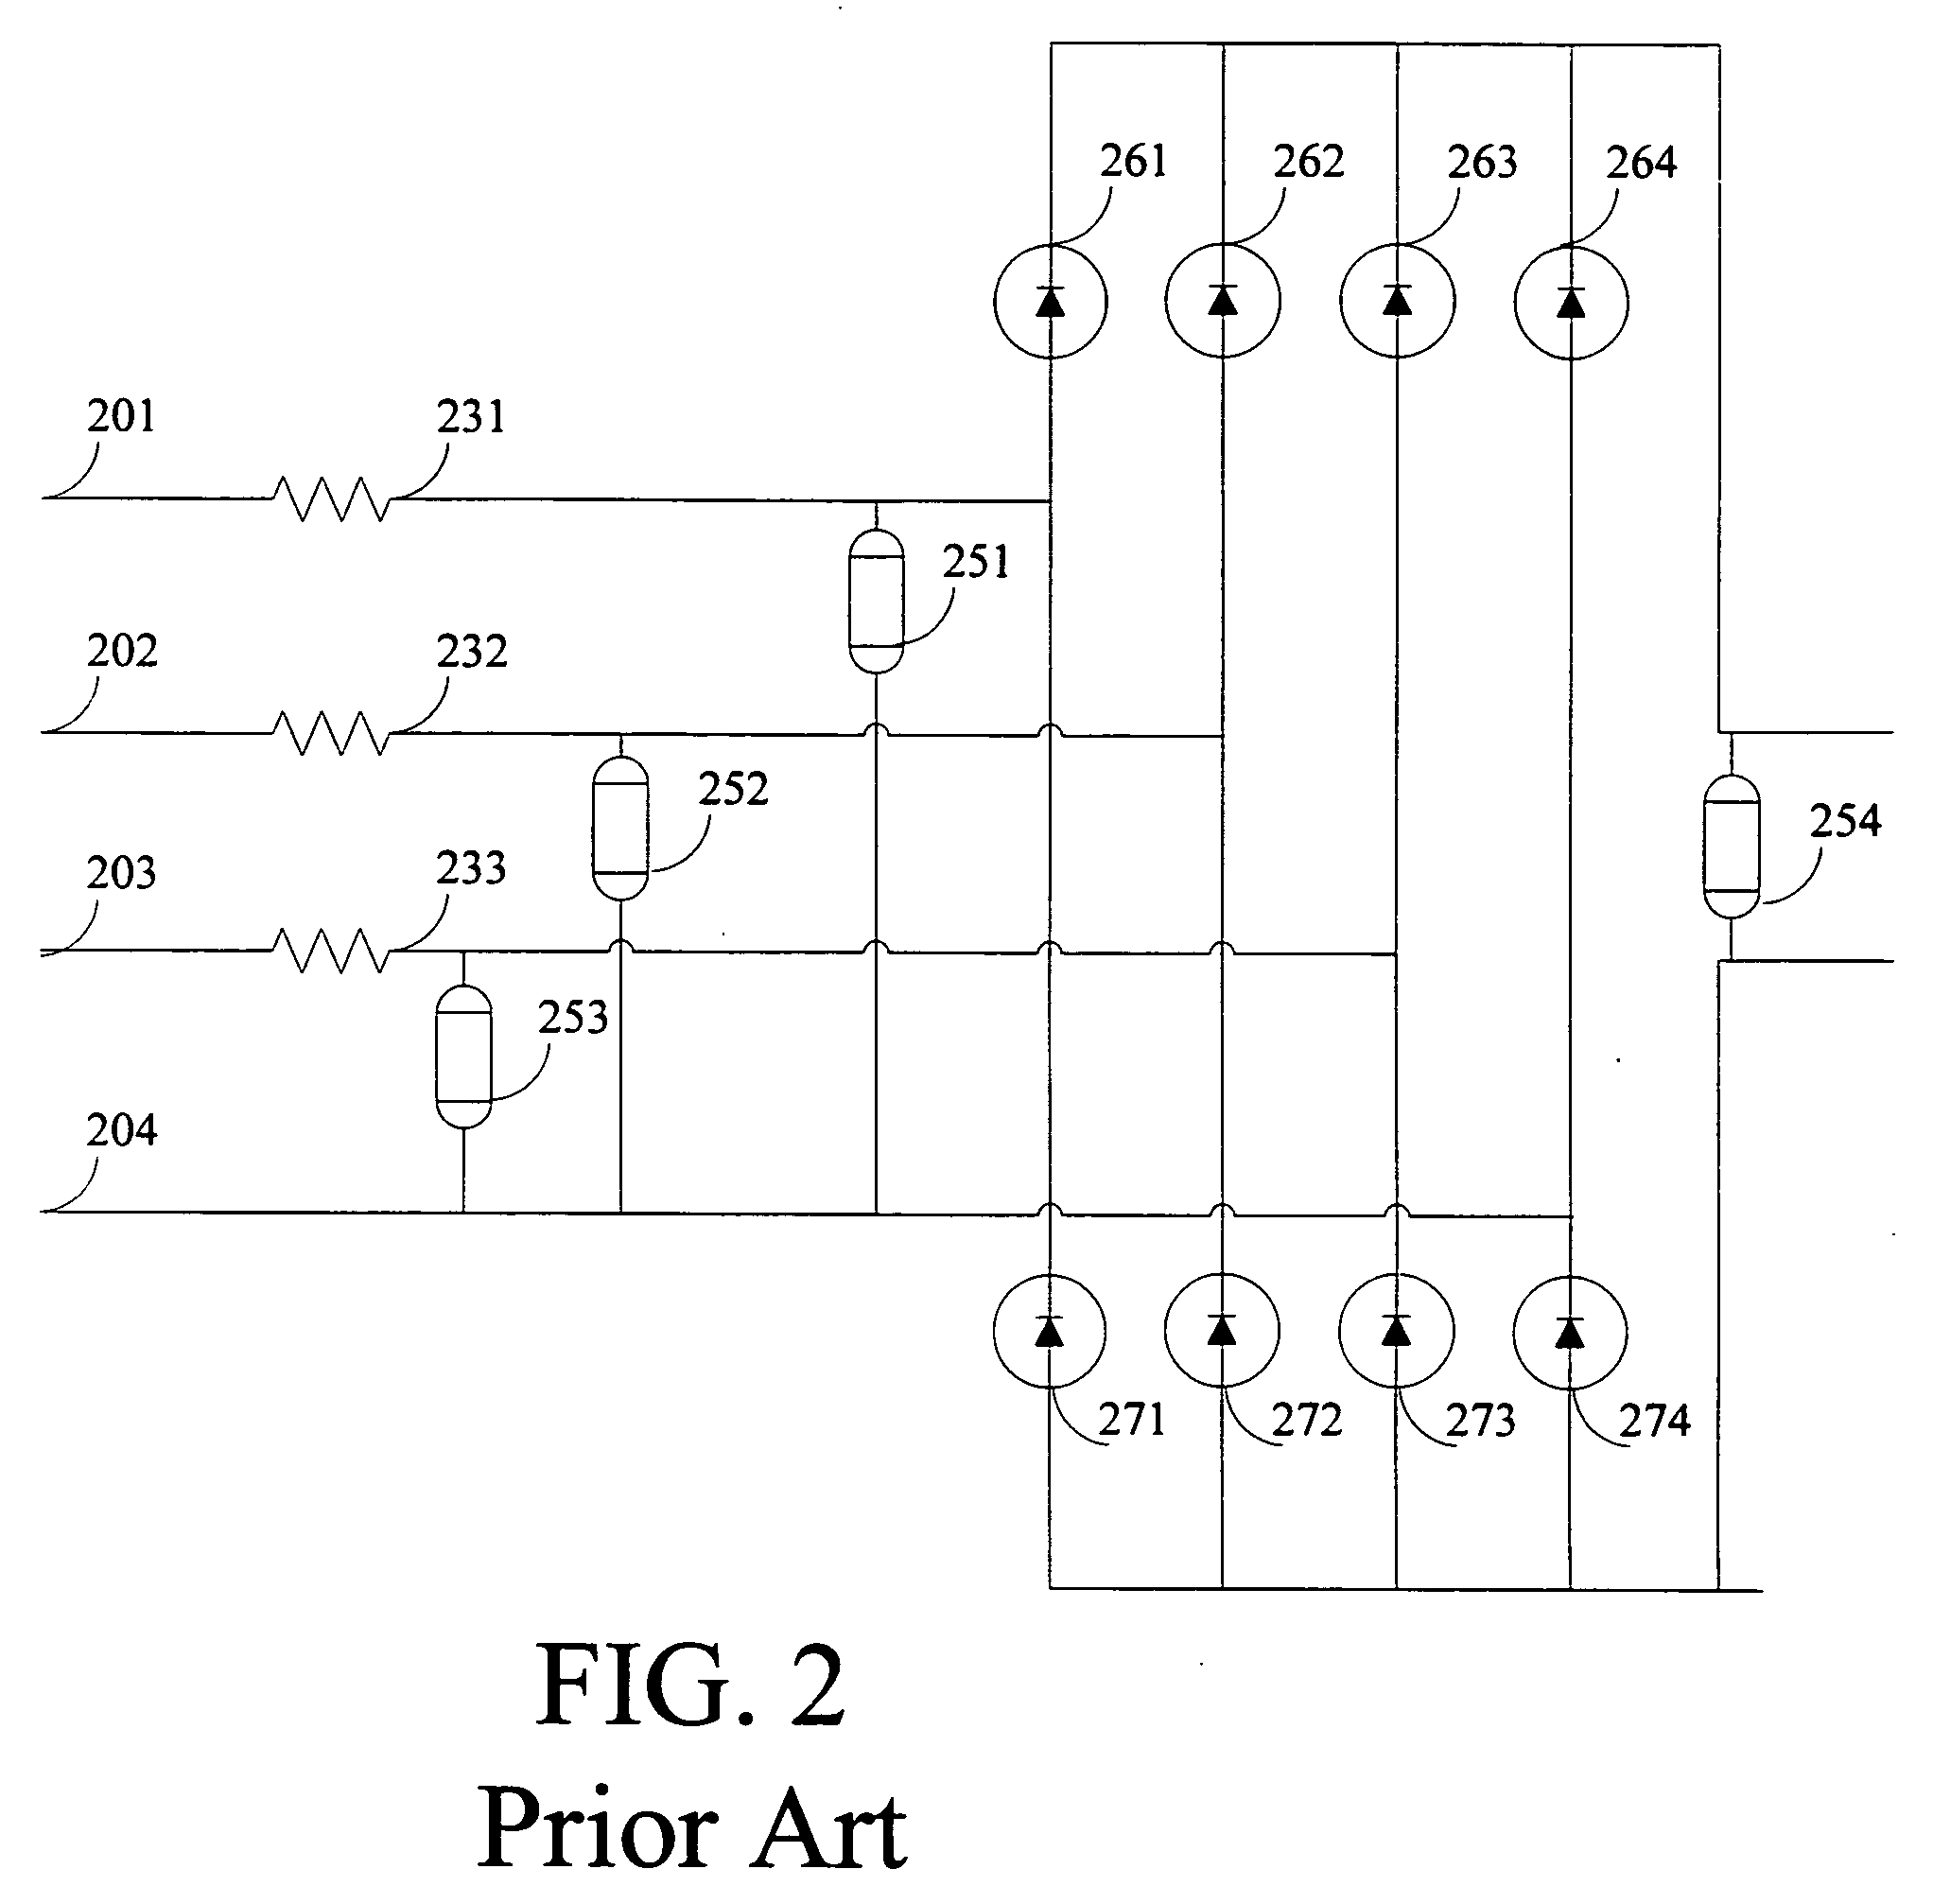 Transient protector circuit for multi-phase energized power supplies